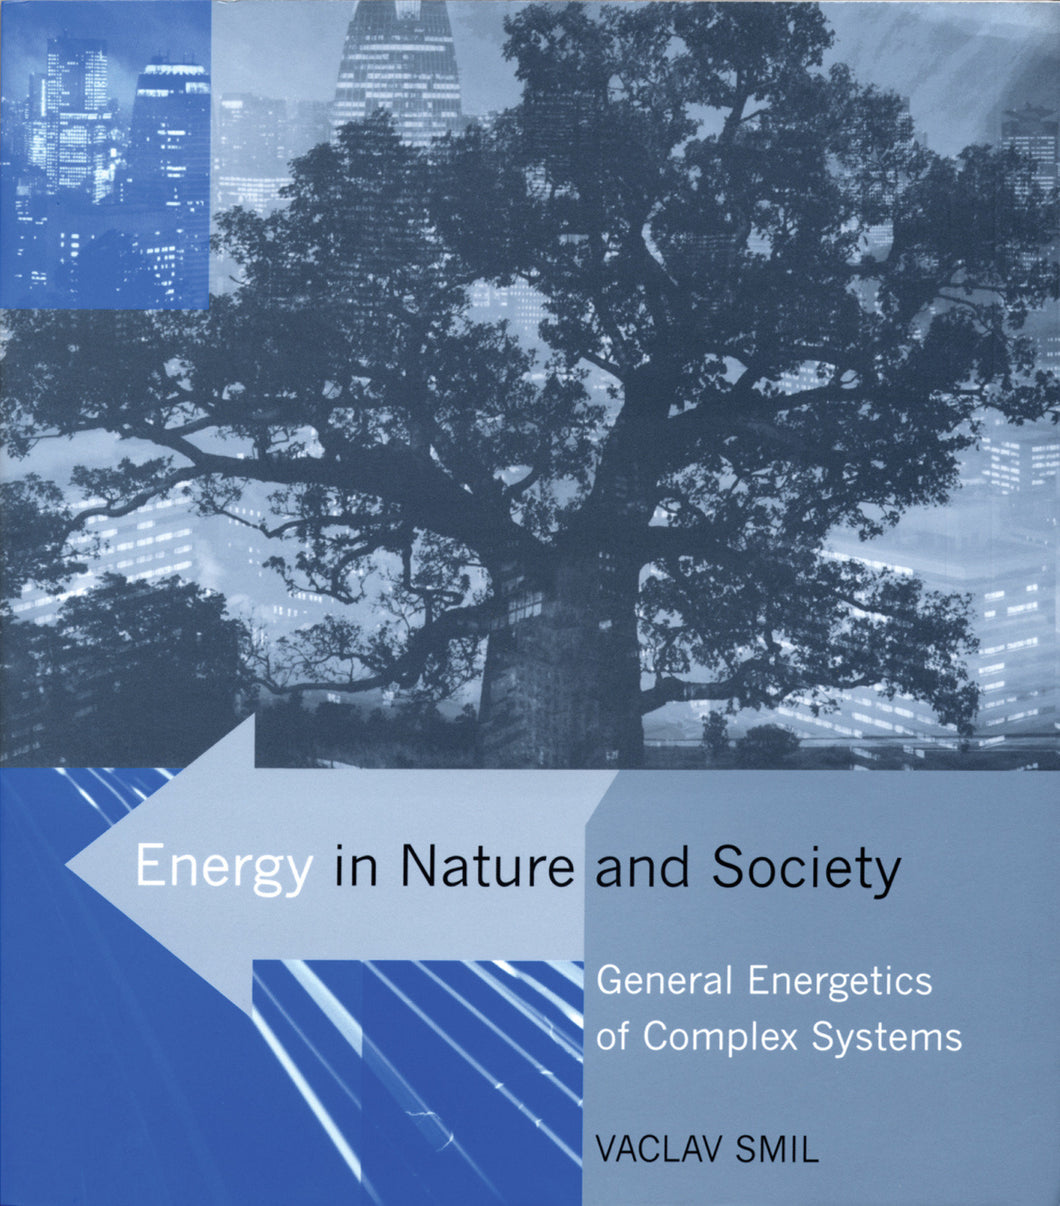 Energy in Nature and Society: General Energetics of Complex Systems